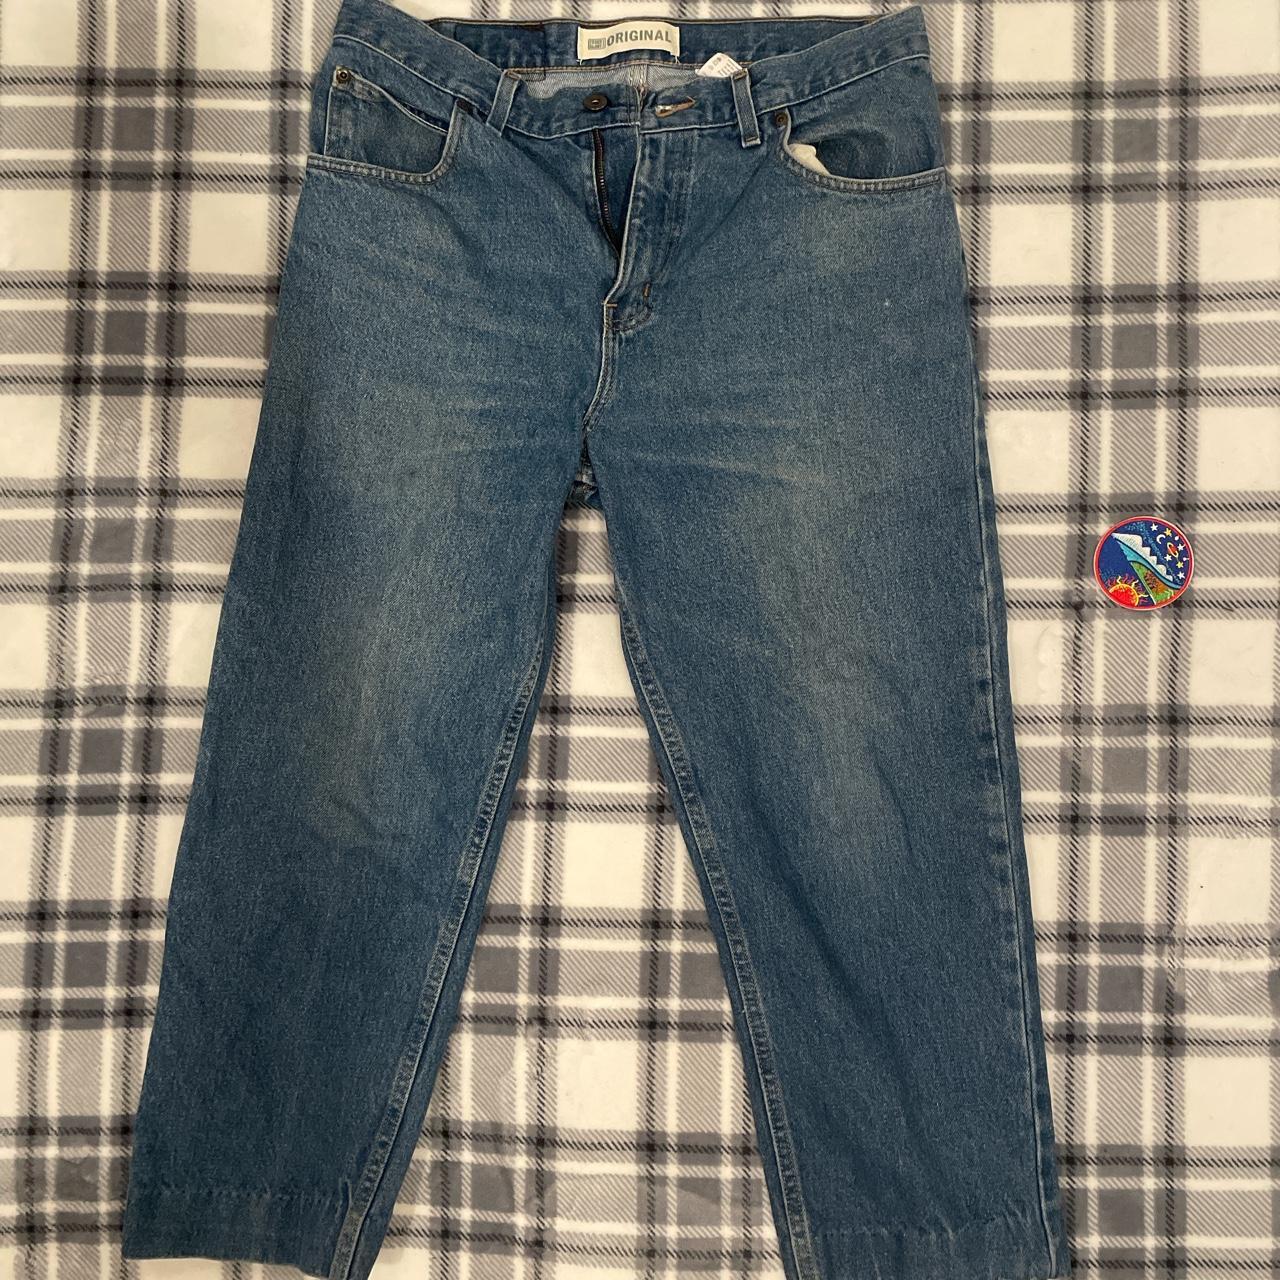 Vintage Faded Glory Original Jeans 34 x 29 Easy to... - Depop